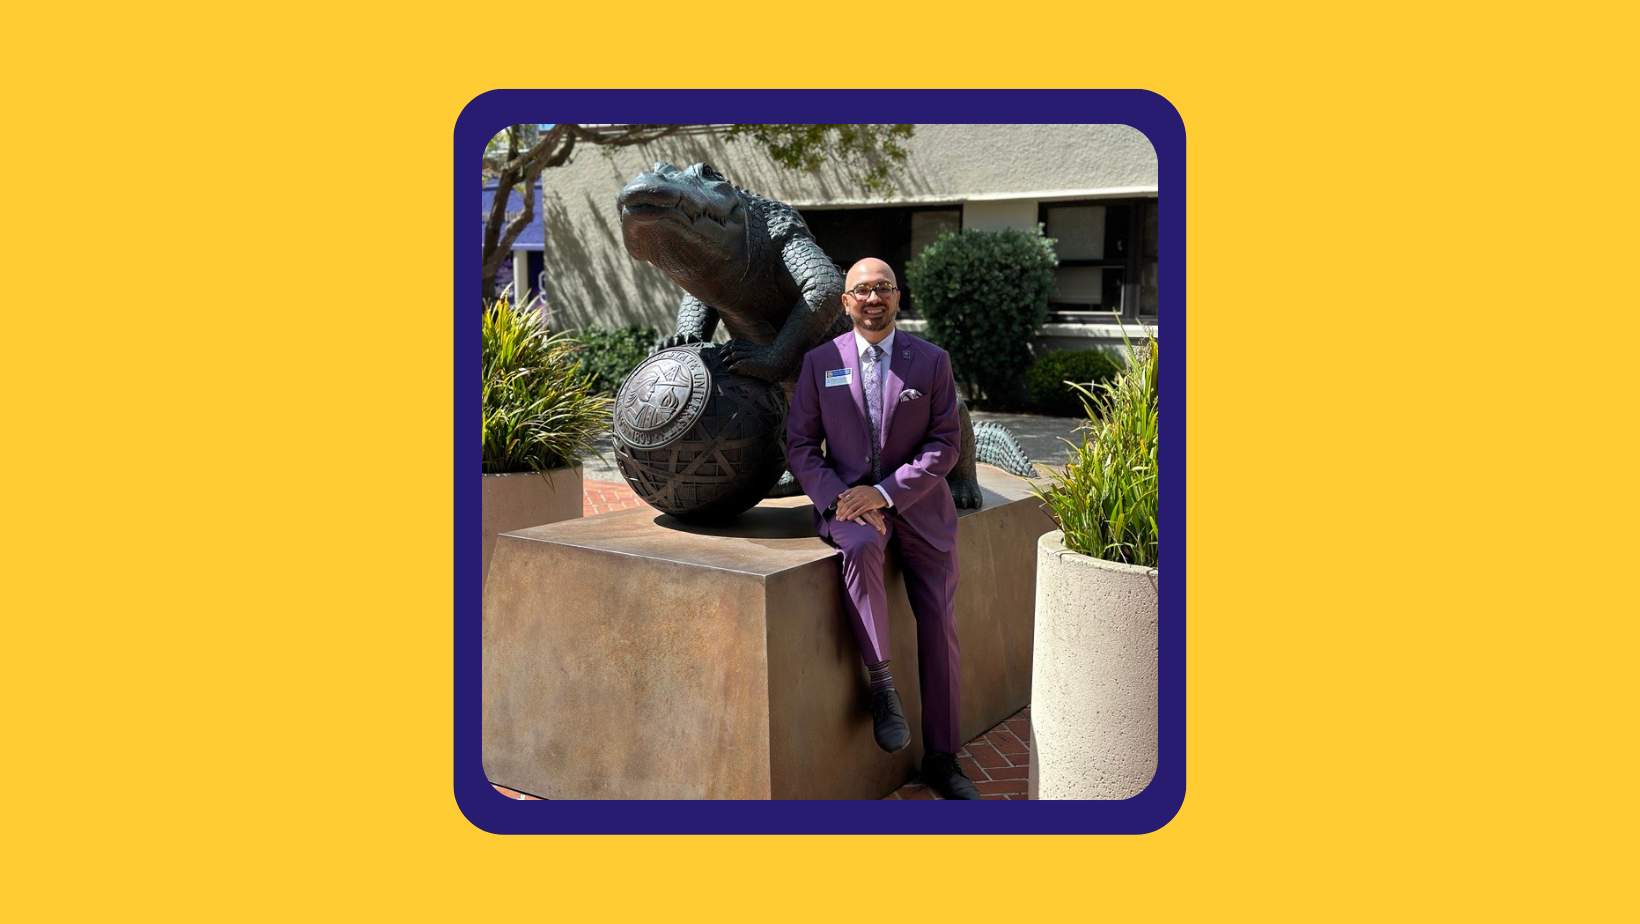 Dean Miguel, in a purple suit posed next to the bronze gator statue in Nessar Plaza